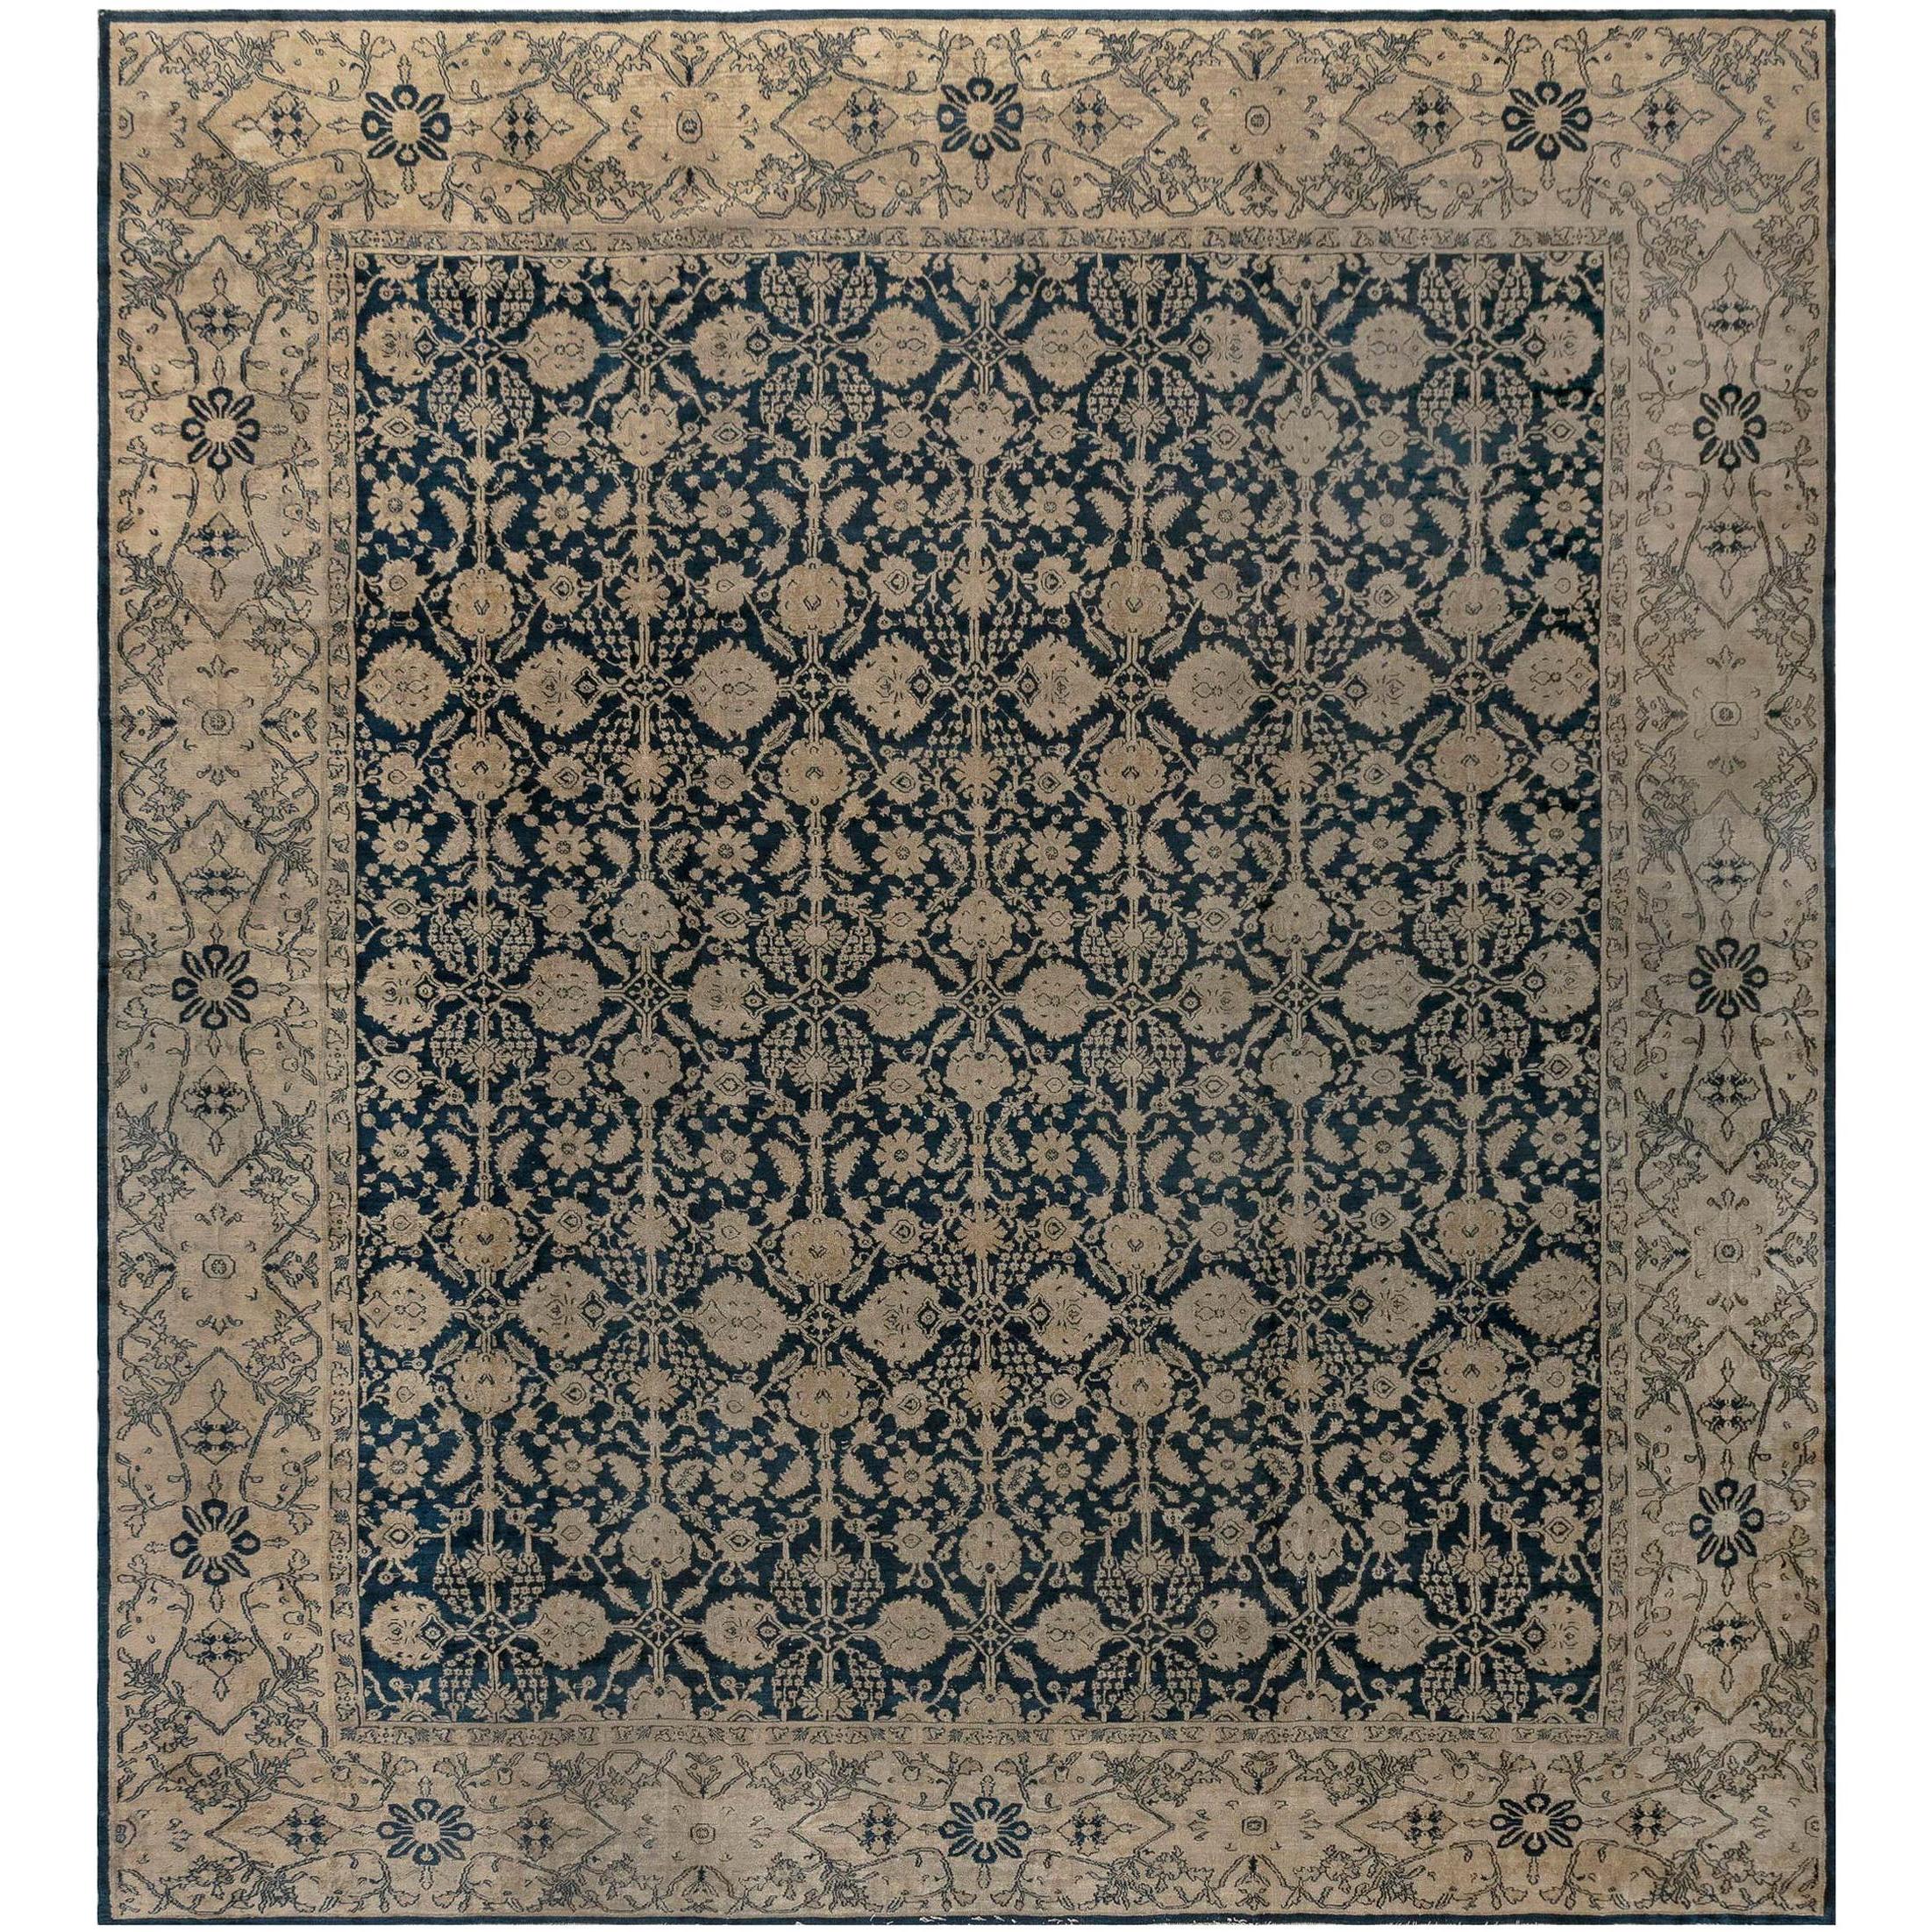 Authentic 19th Century Indian Agra Rug For Sale